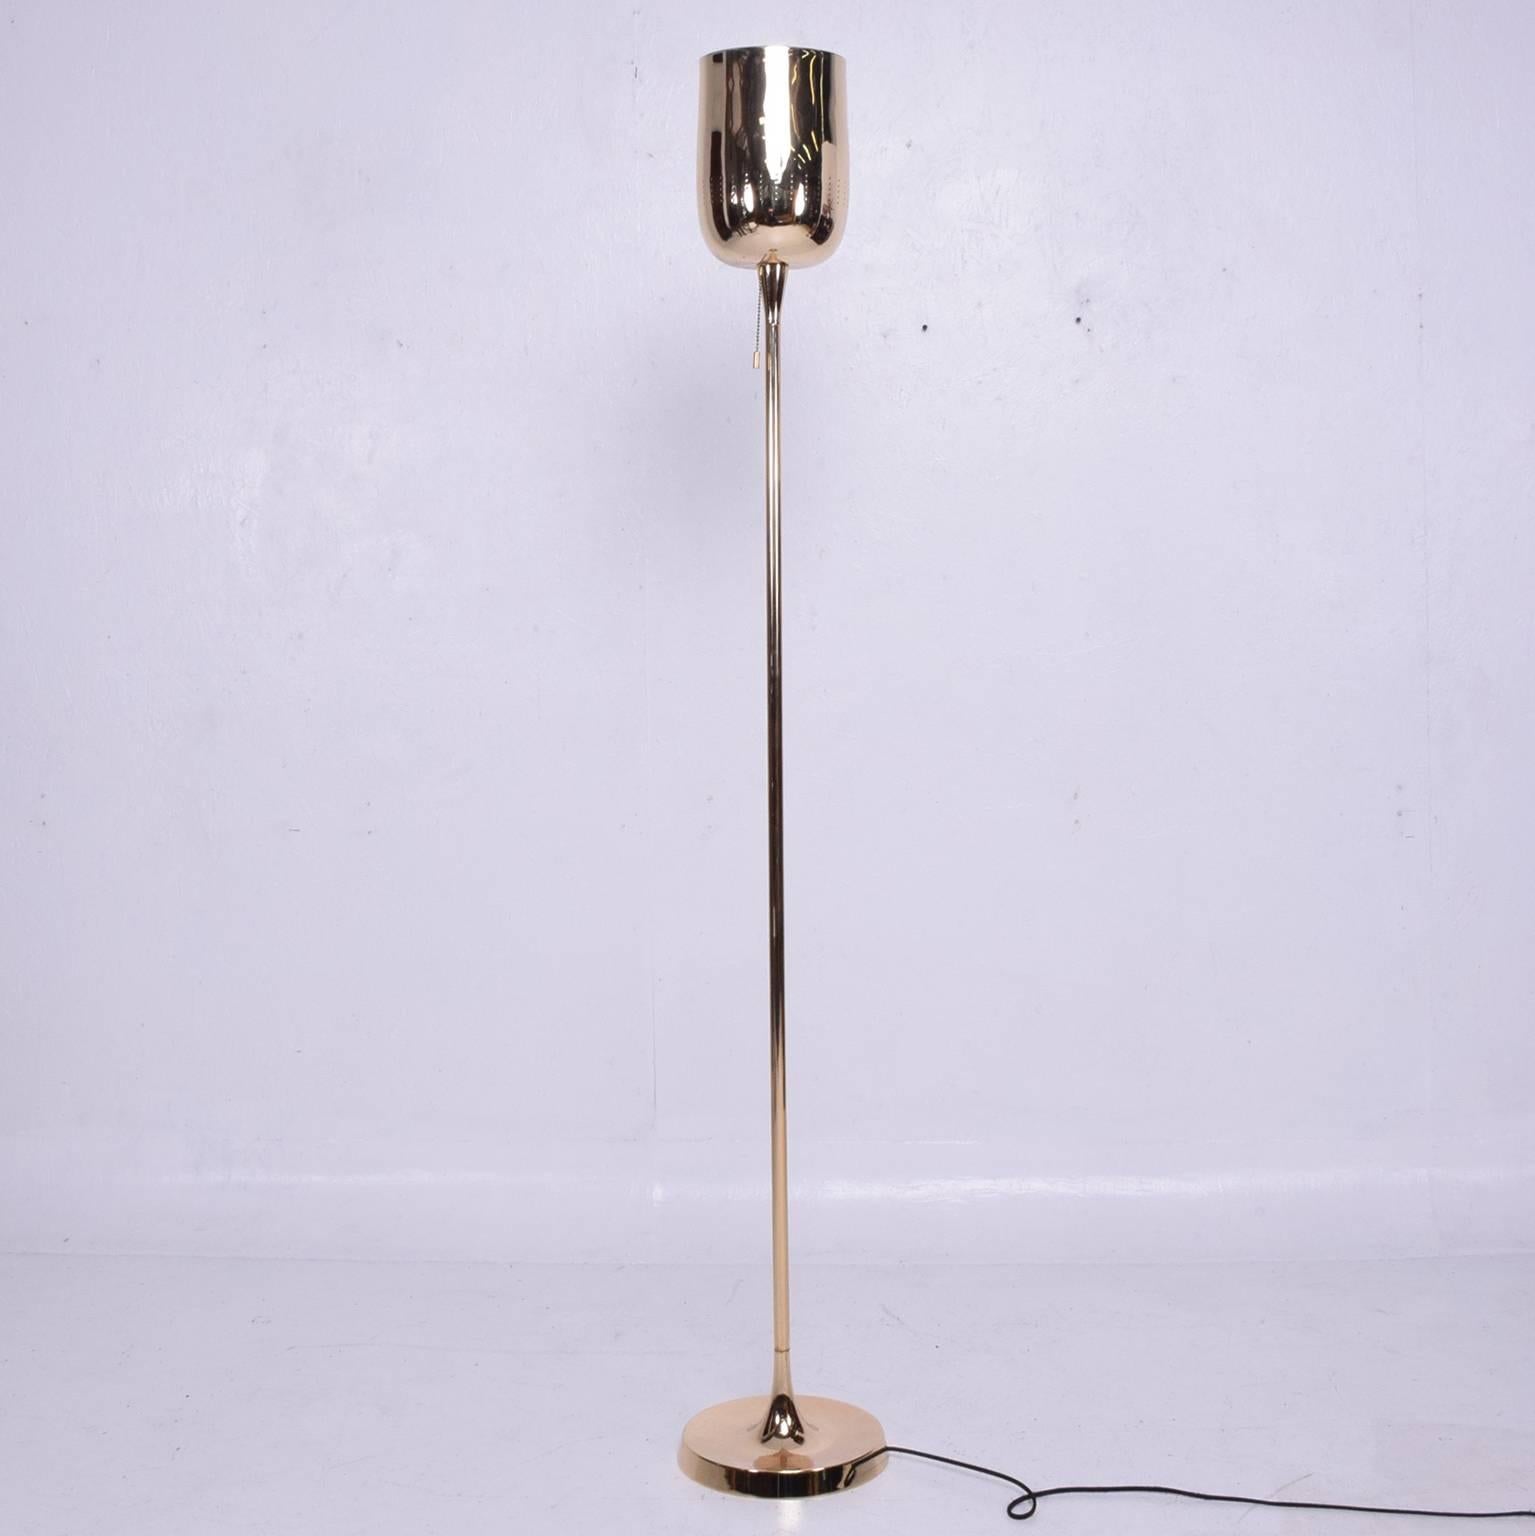 For your consideration a vintage floor lamp (new brass plated finish).
Spectacular clean, sculptural and modern design.
Unmarked, no information on the maker. 

Measures: 65